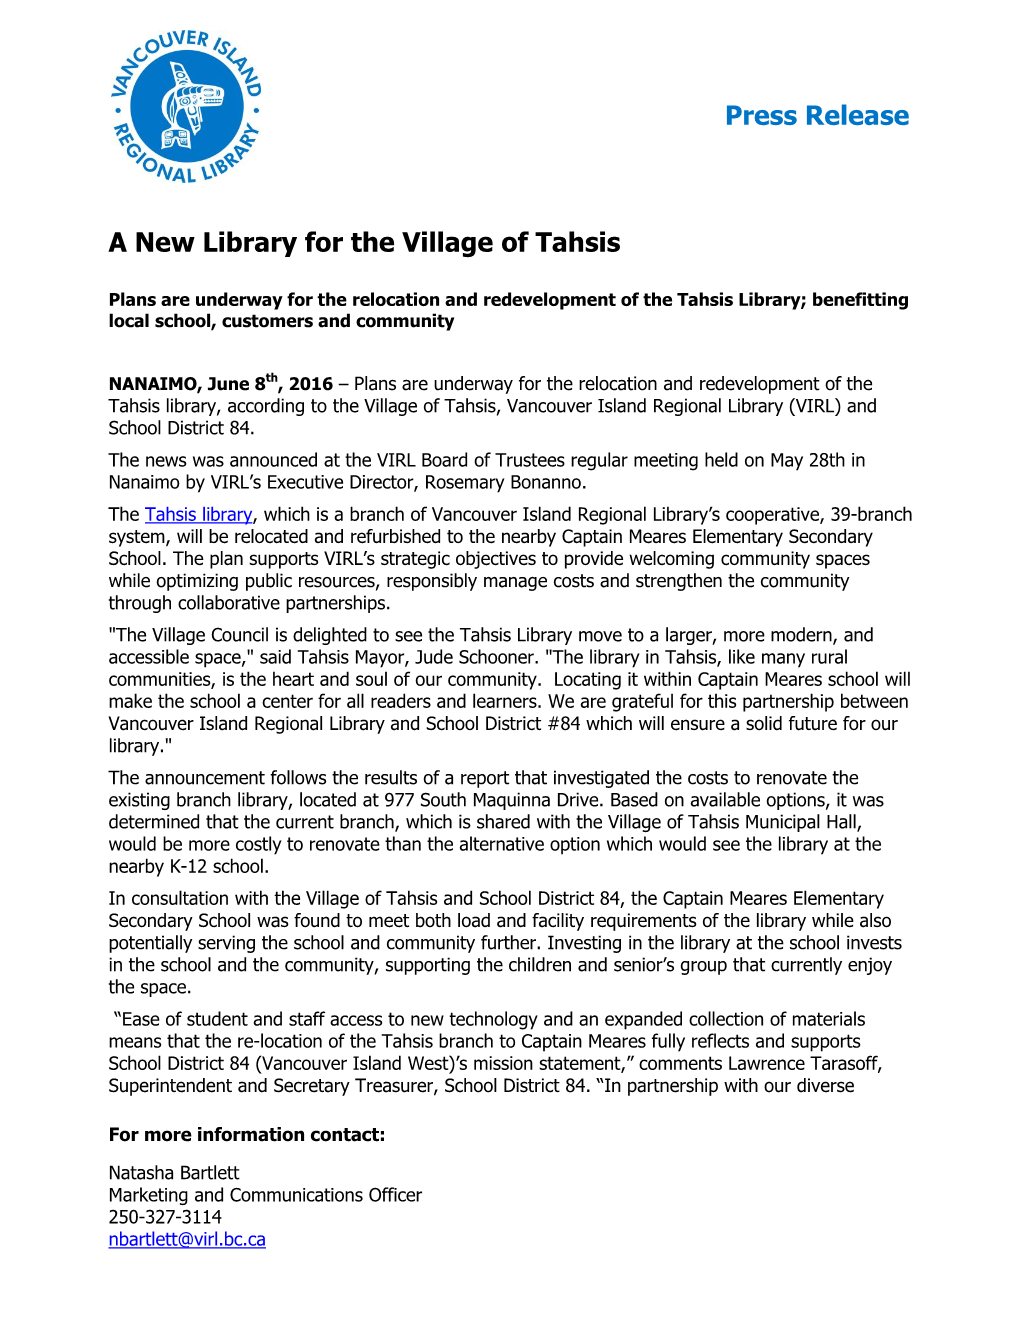 Press Release a New Library for the Village of Tahsis